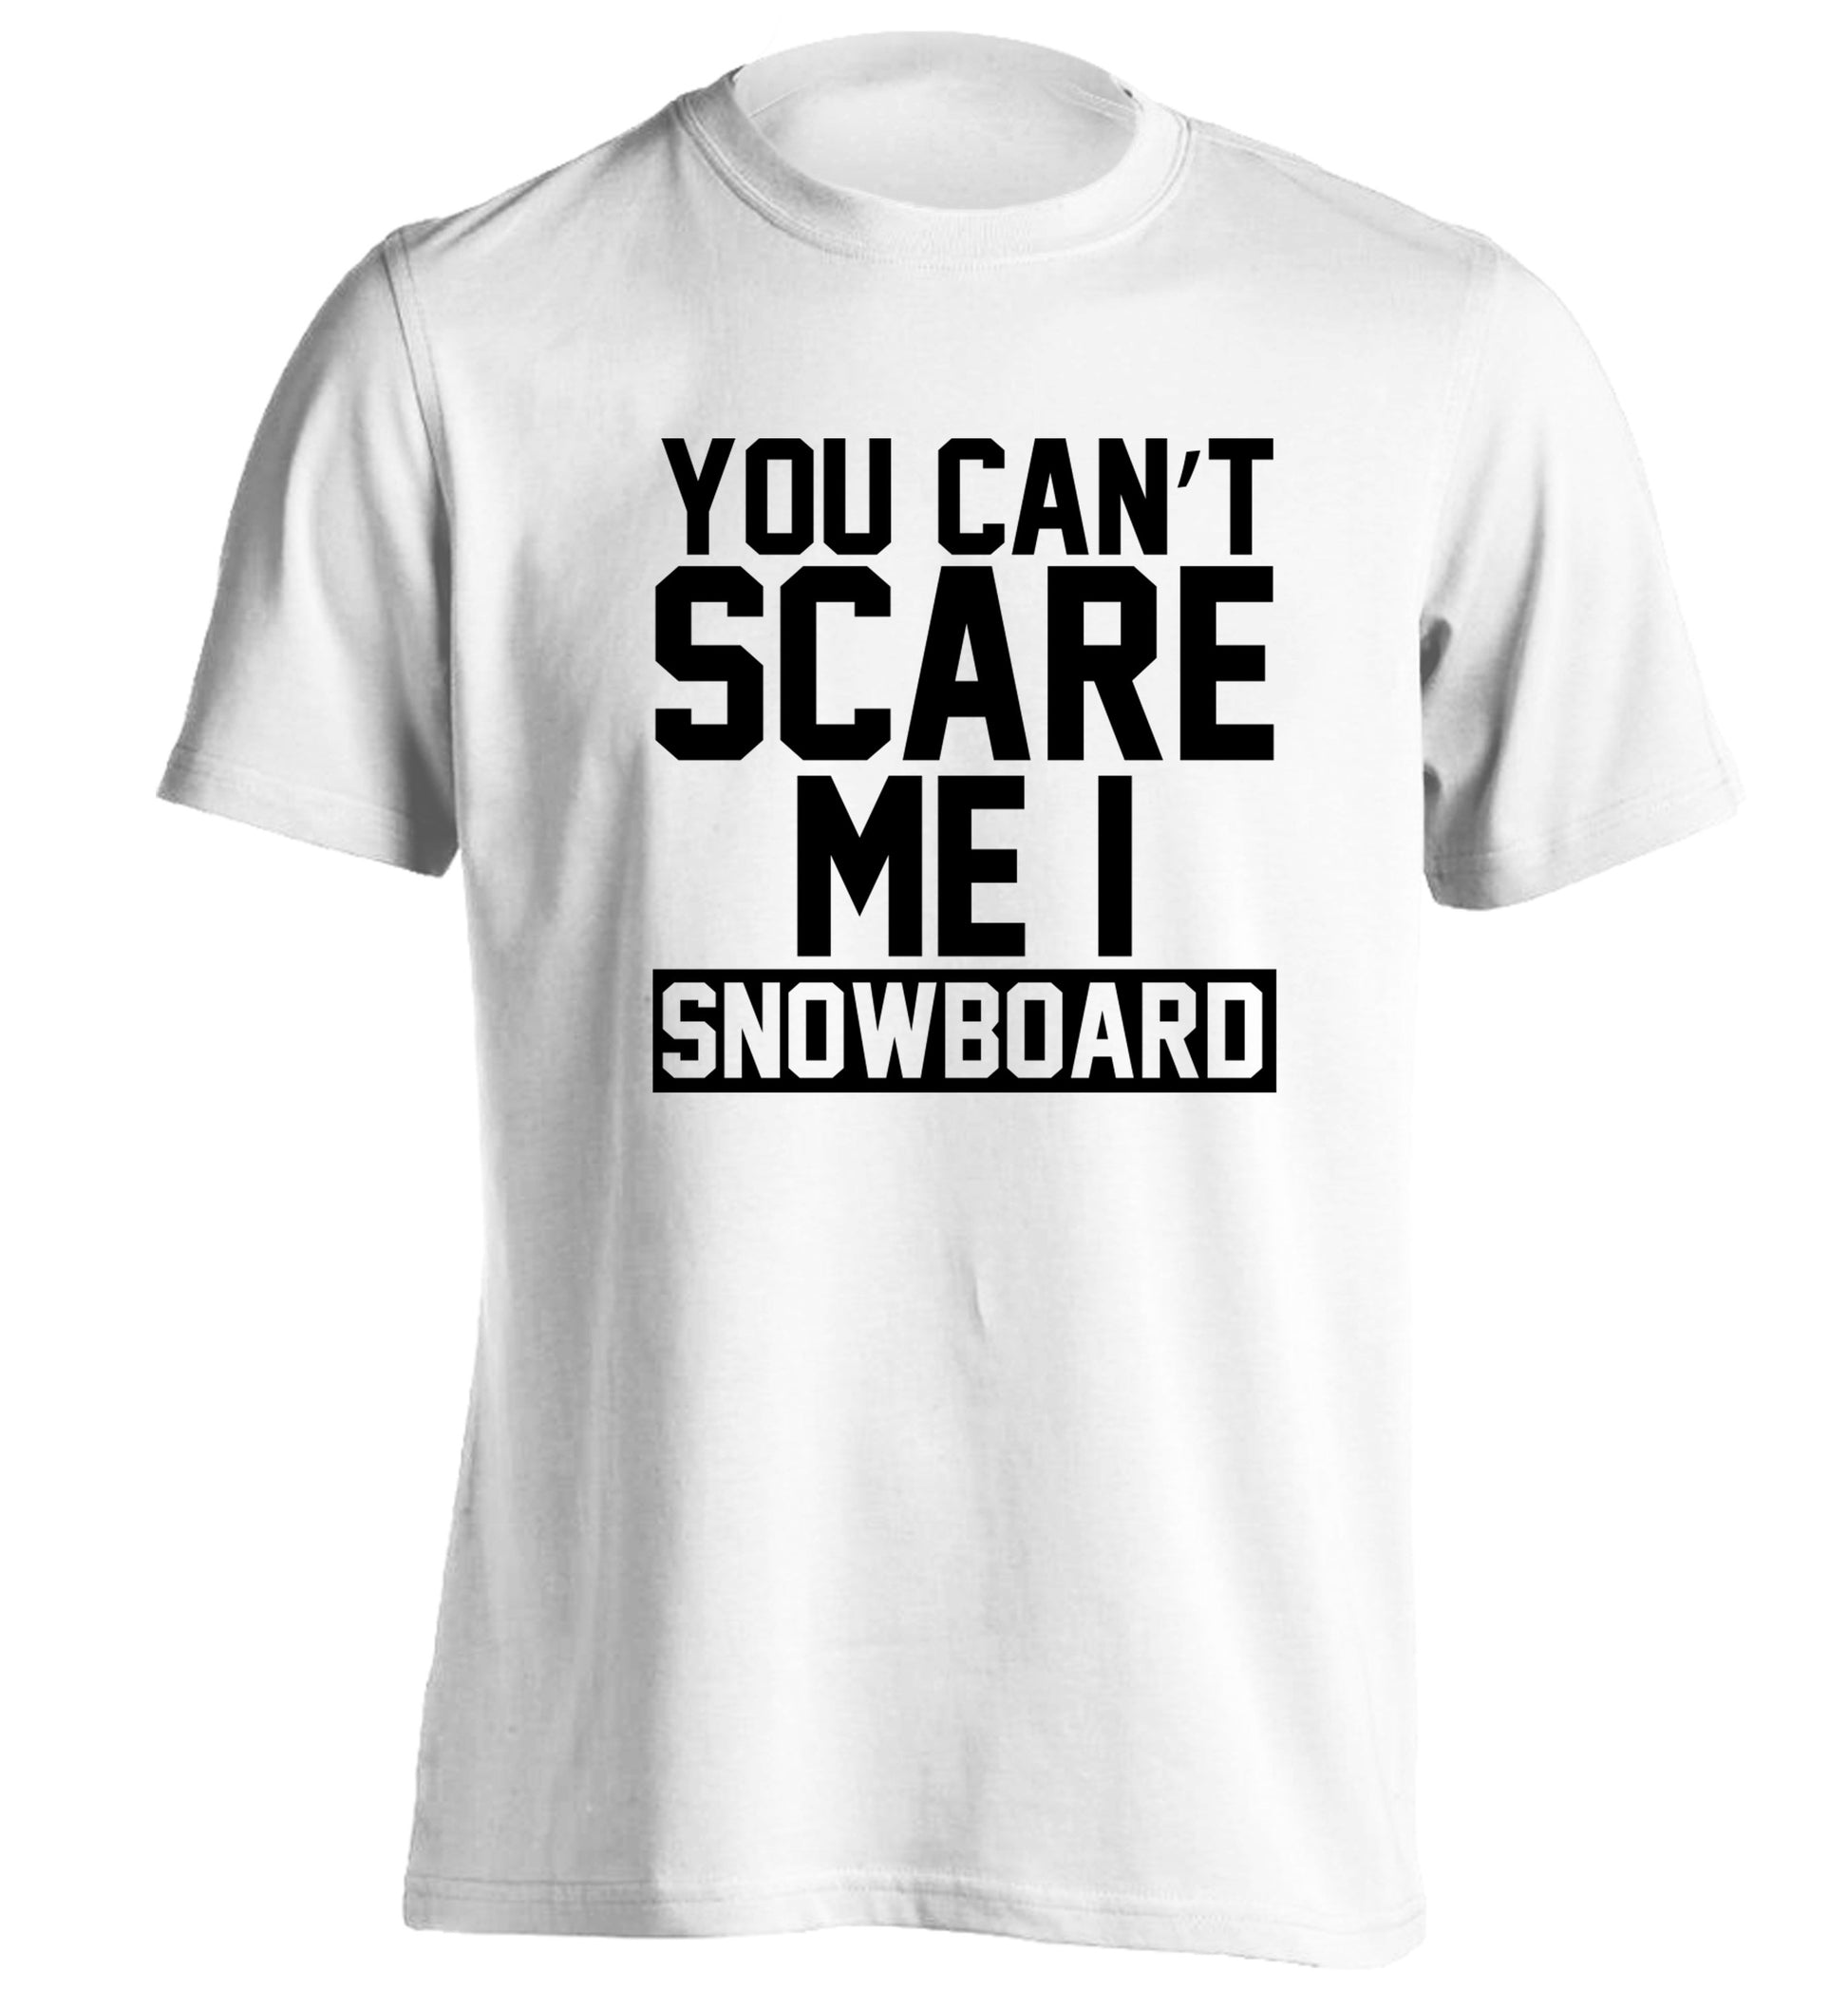 You can't scare me I snowboard adults unisex white Tshirt 2XL